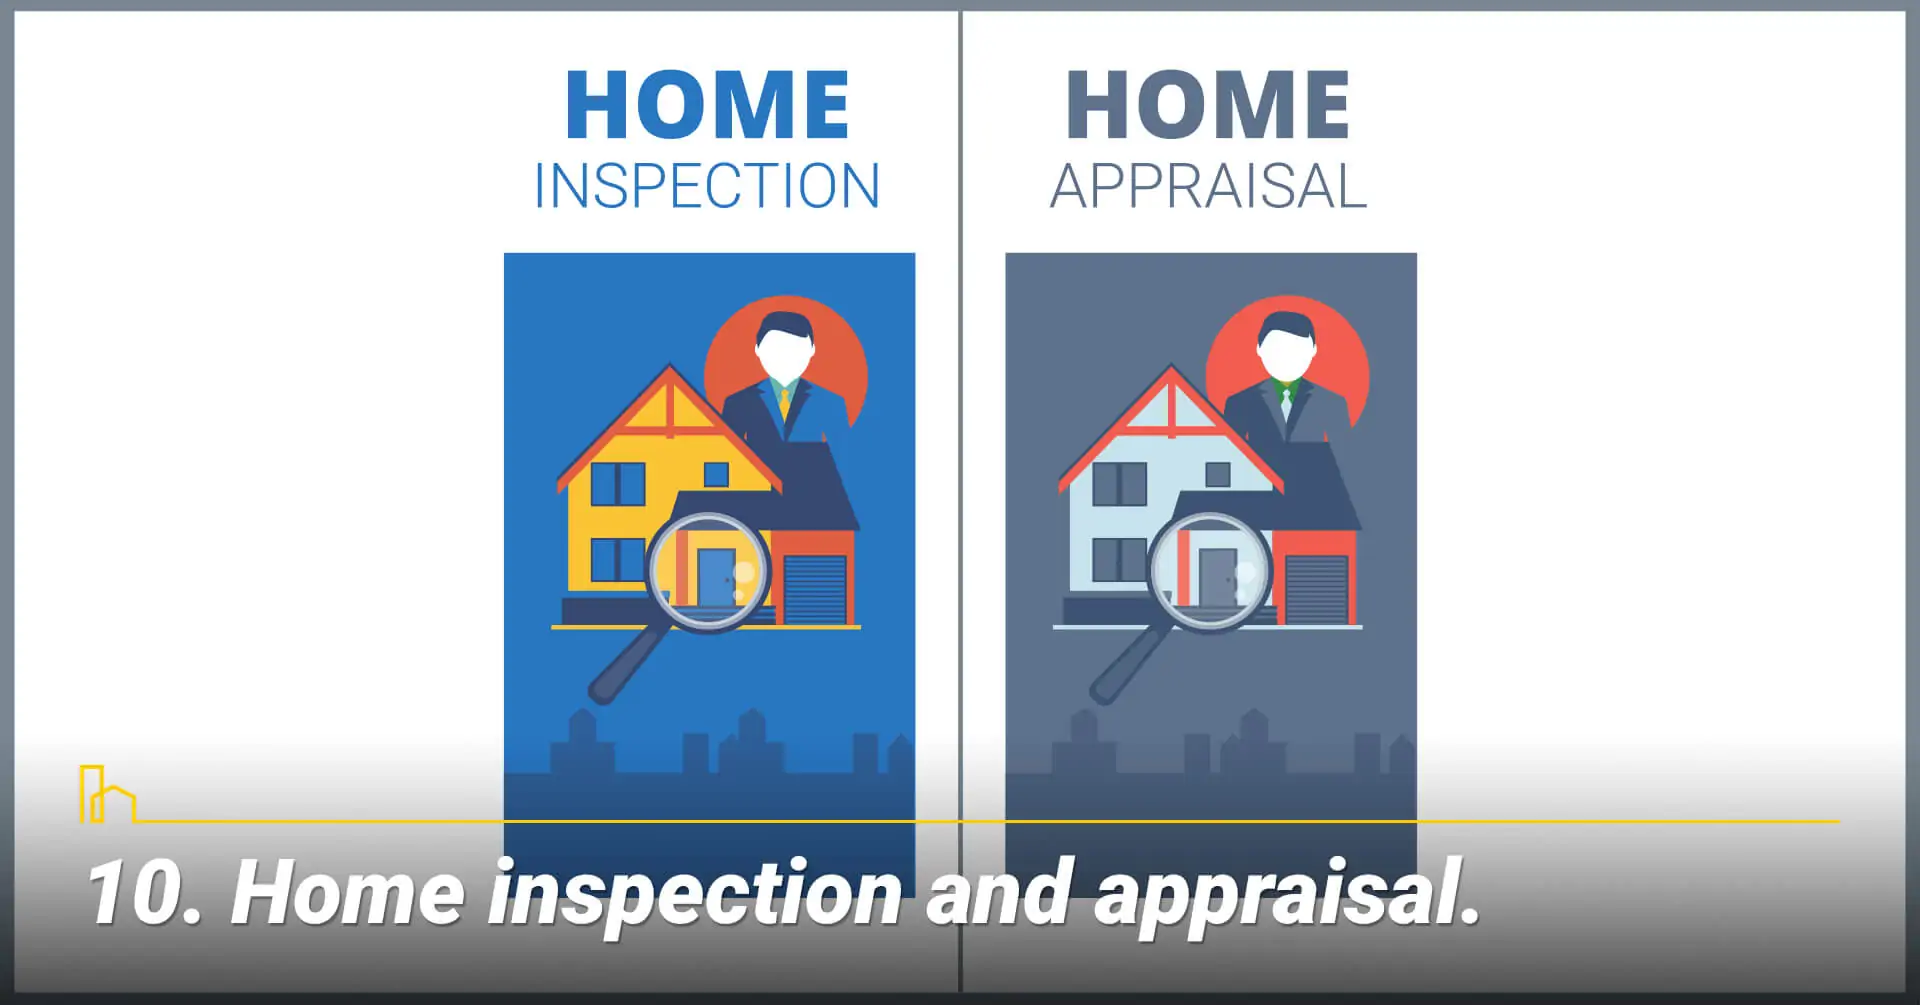 Home inspection and appraisal, final steps in selling your home